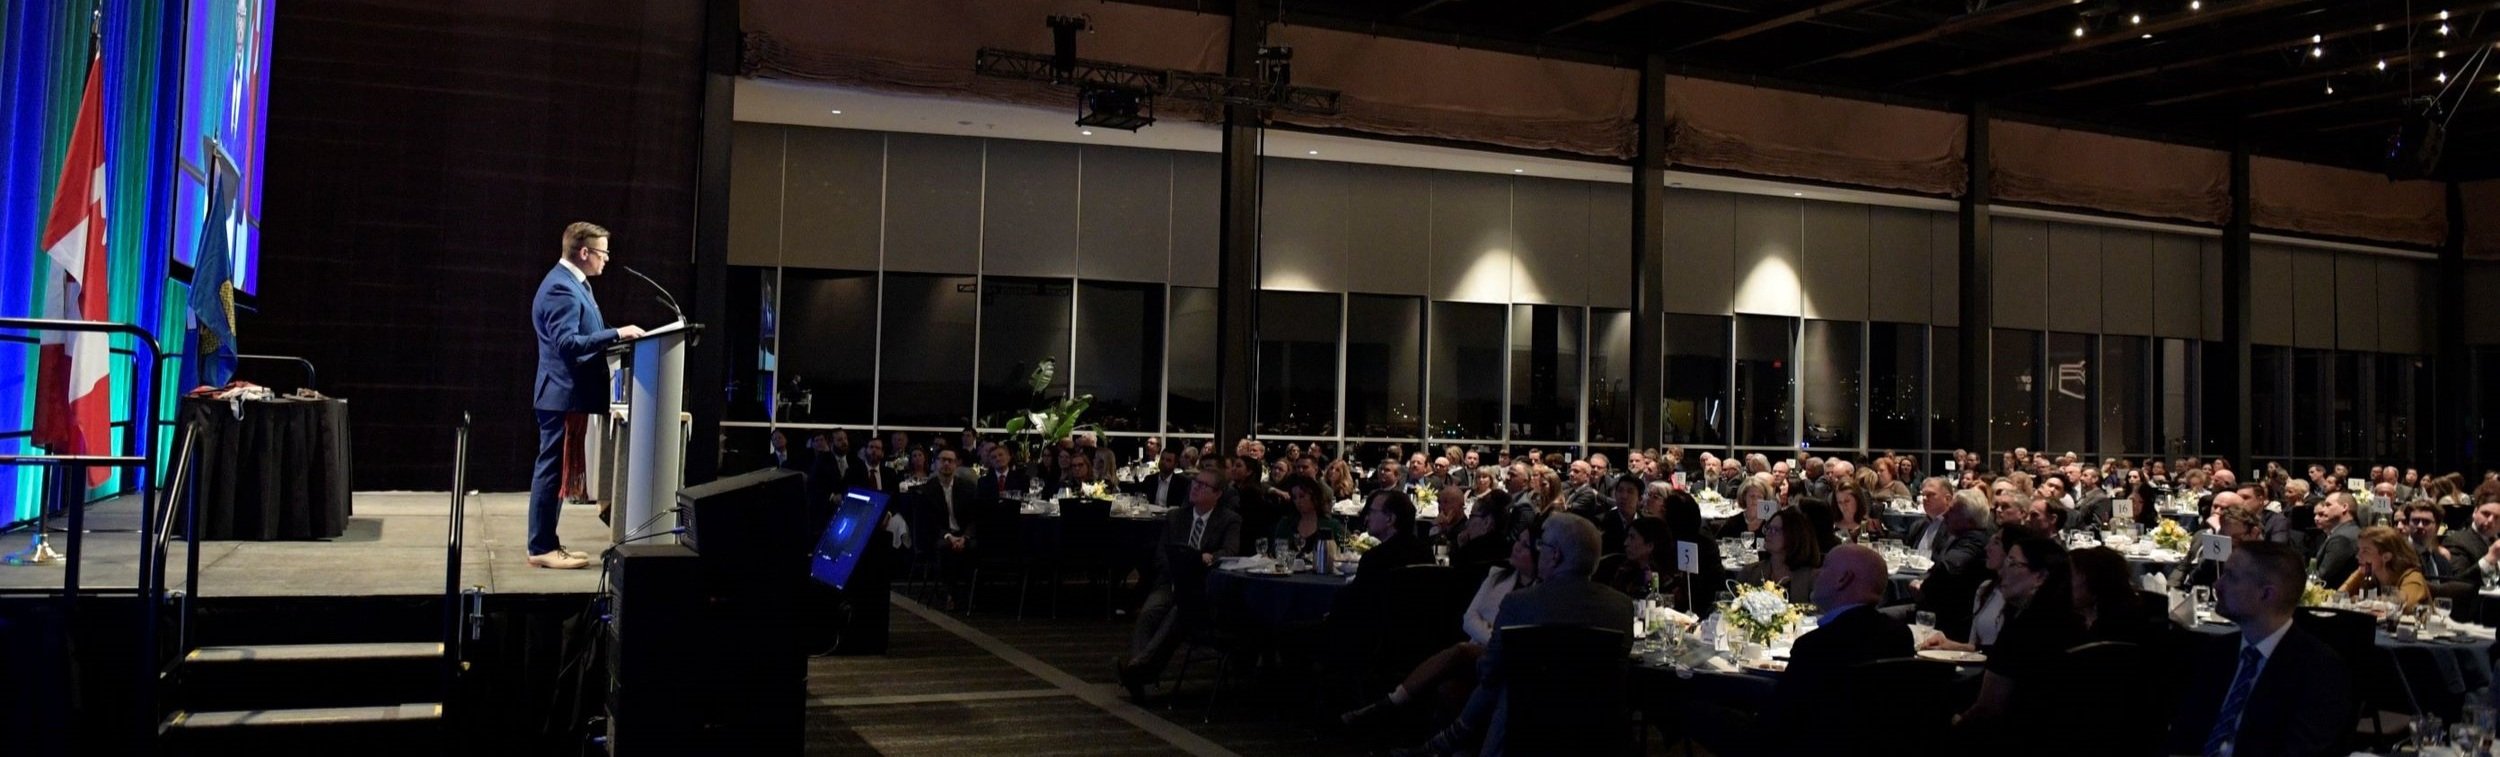 Alberta Chamber of Resources Annual General Meeting & Awards Banquet